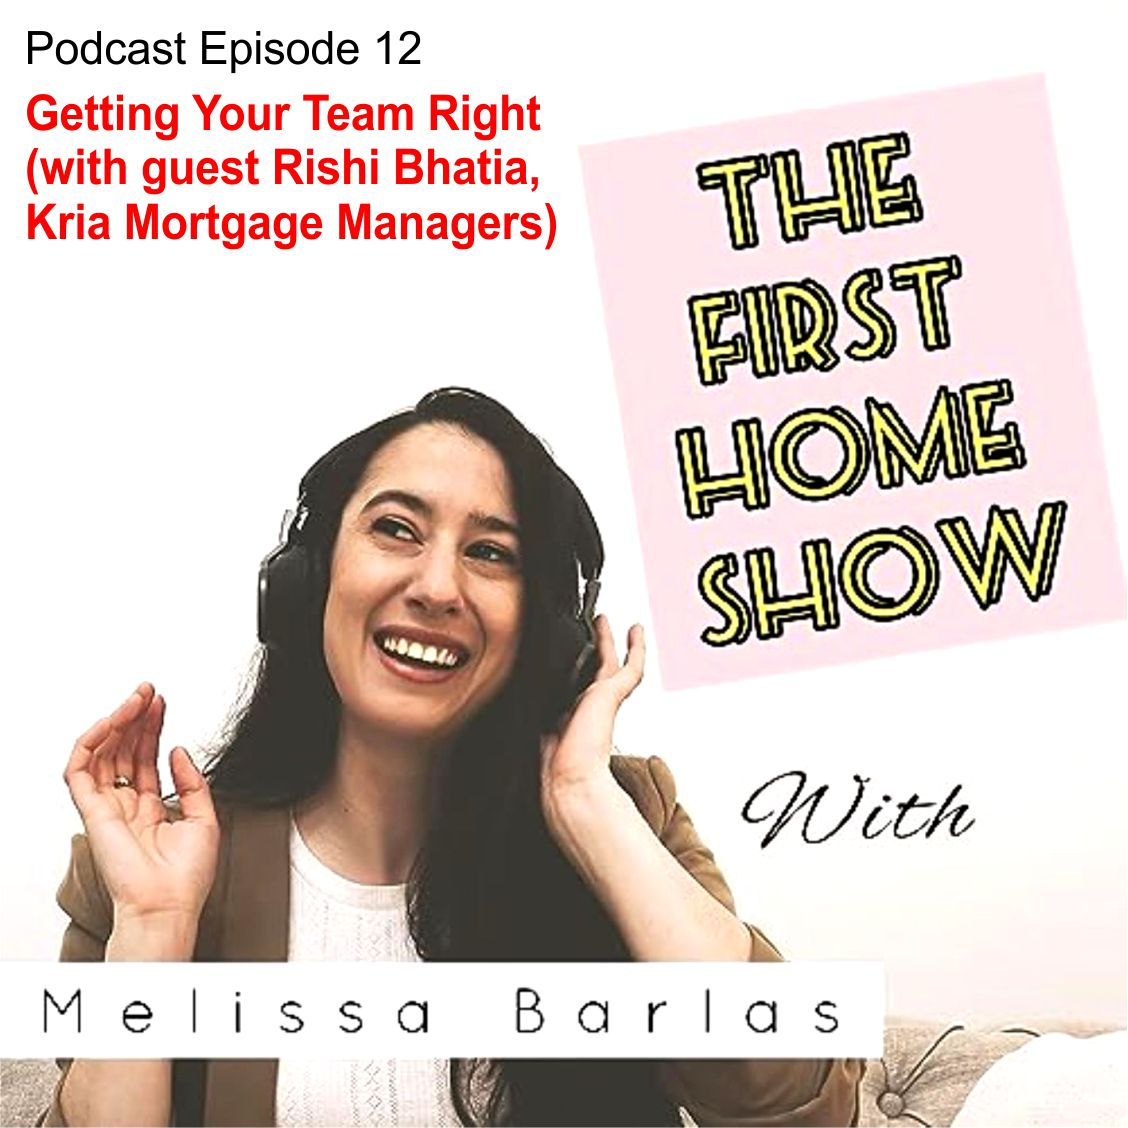 Podcast_Episode_12 - Getting Your Team Right (with guest Rishi Bhatia, Kria Mortgage Managers